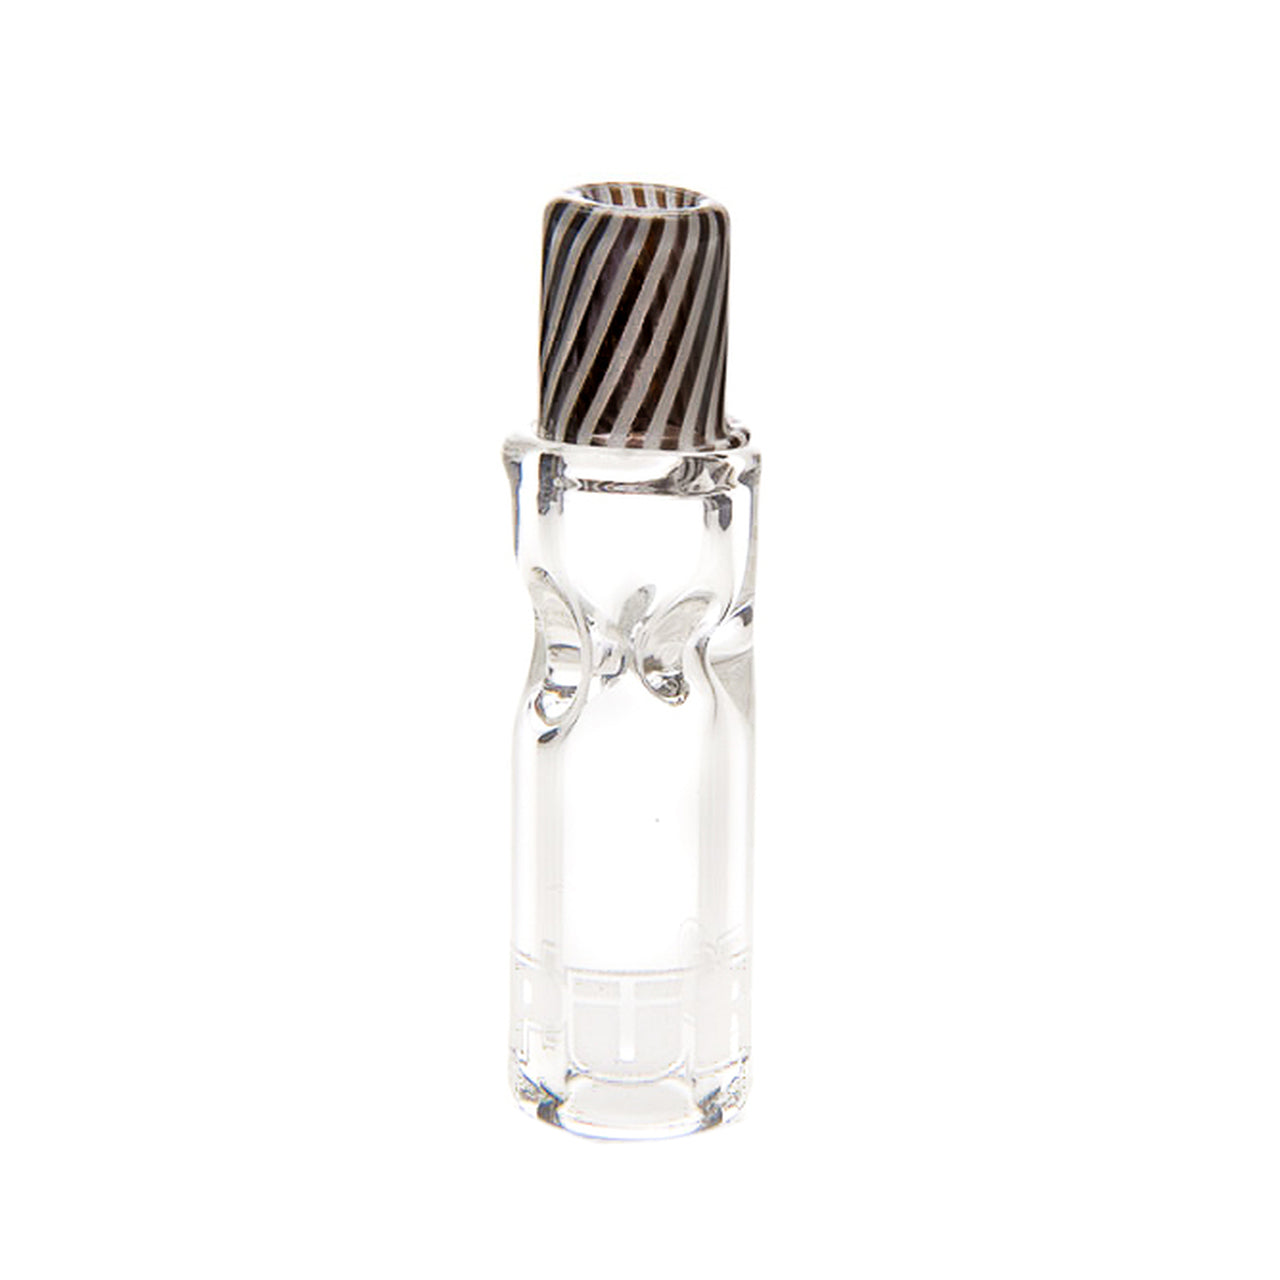 7.5mm Smokey Heady Glass Filter Tip (Clear)